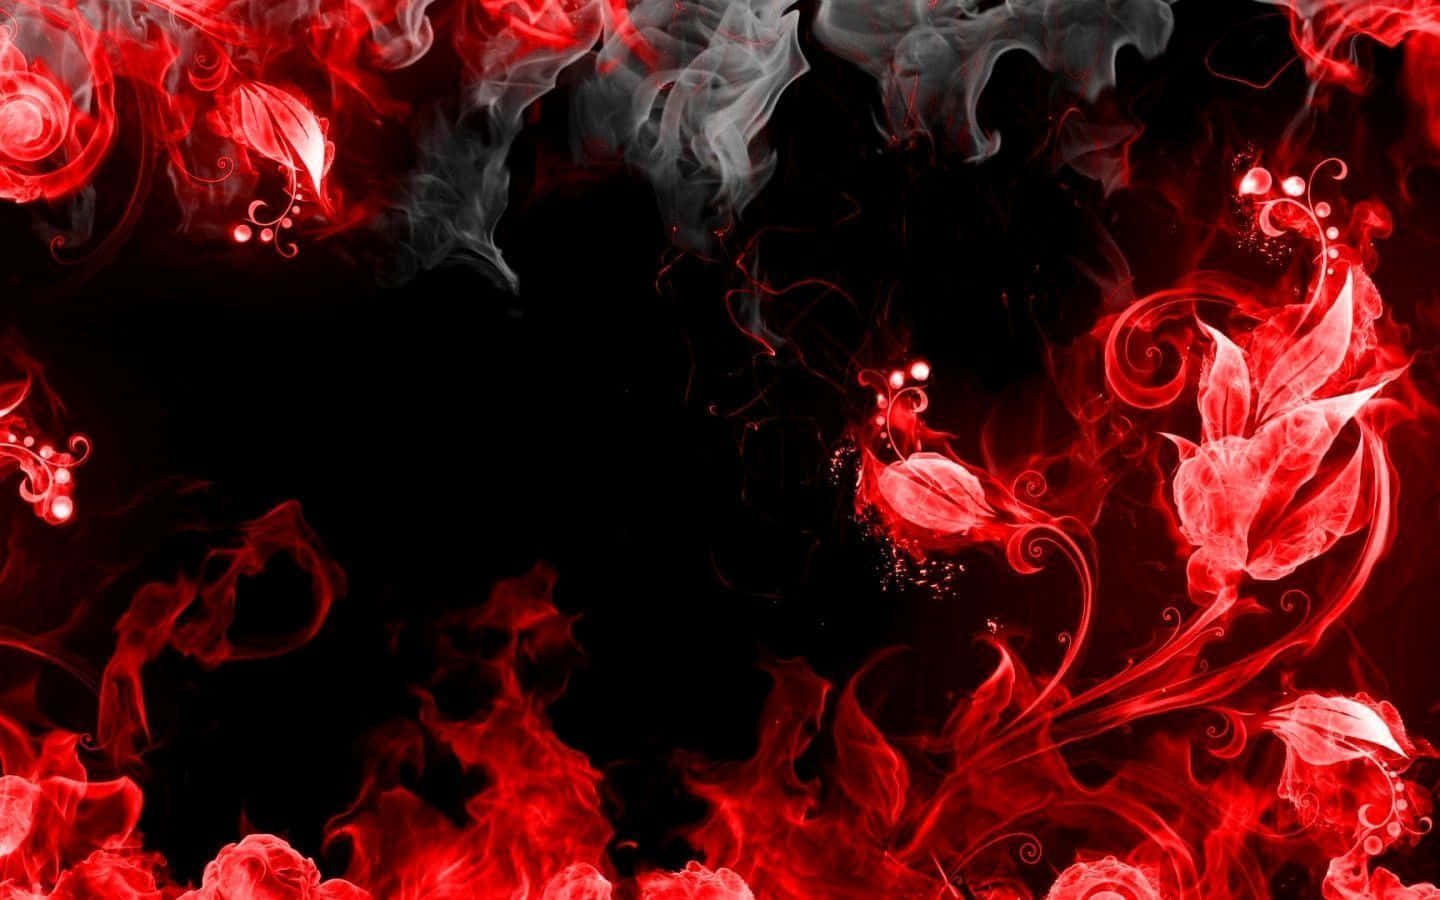 An Abstract Red Black and White Design